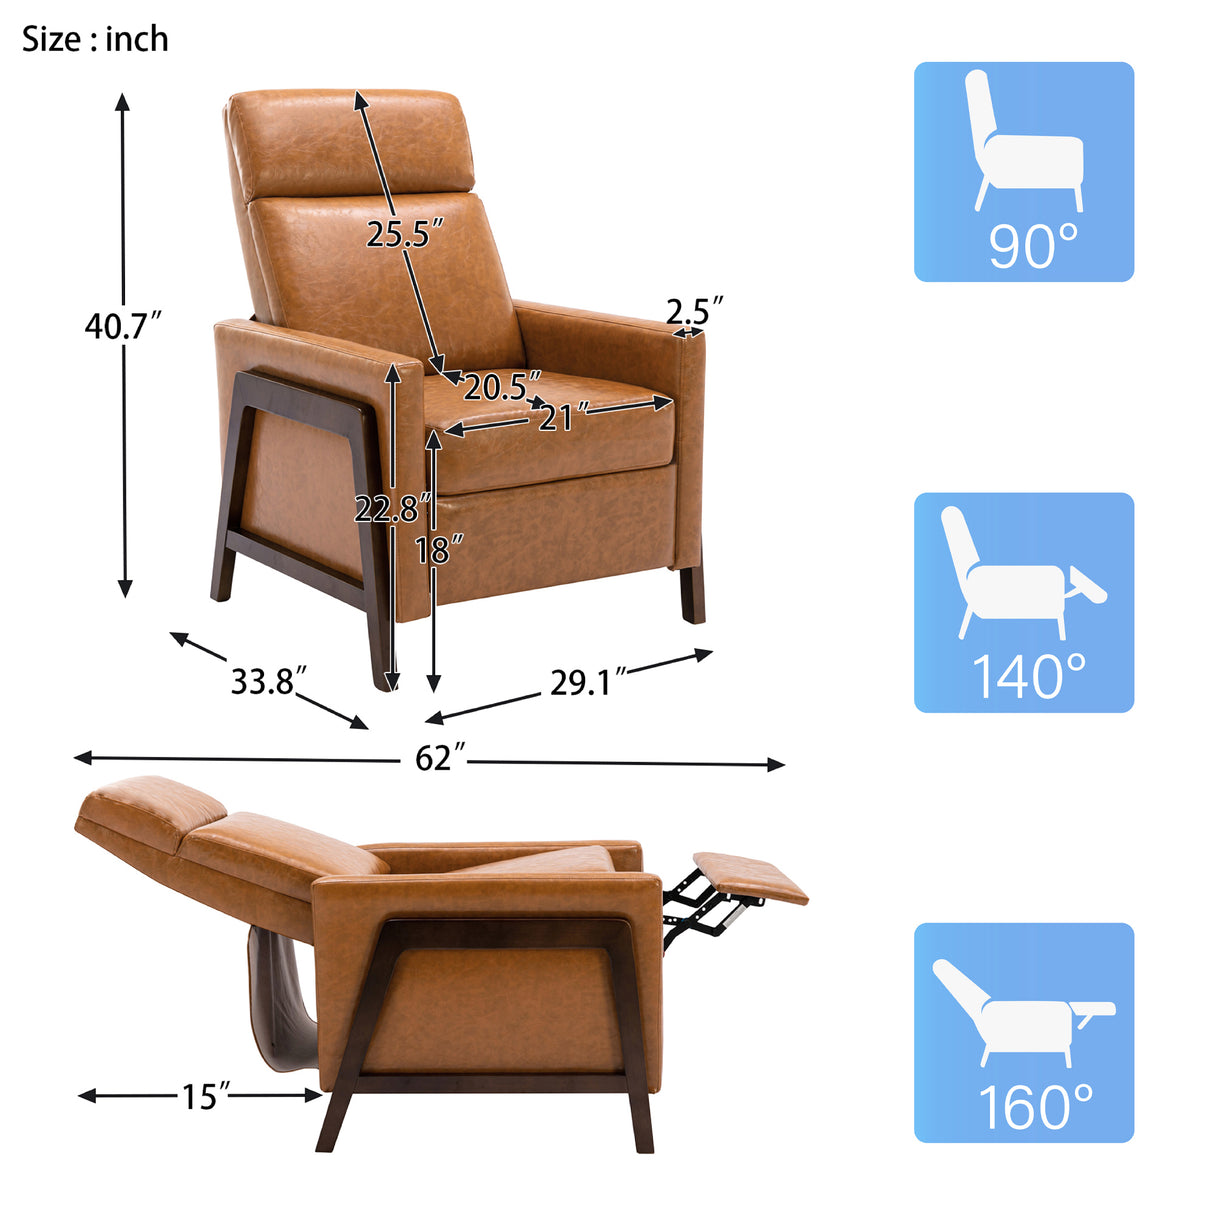 Set of Two Wood-Framed PU Leather Recliner Chair Adjustable Home Theater Seating with Thick Seat Cushion and Backrest Modern Living Room Recliners, Brown - Home Elegance USA